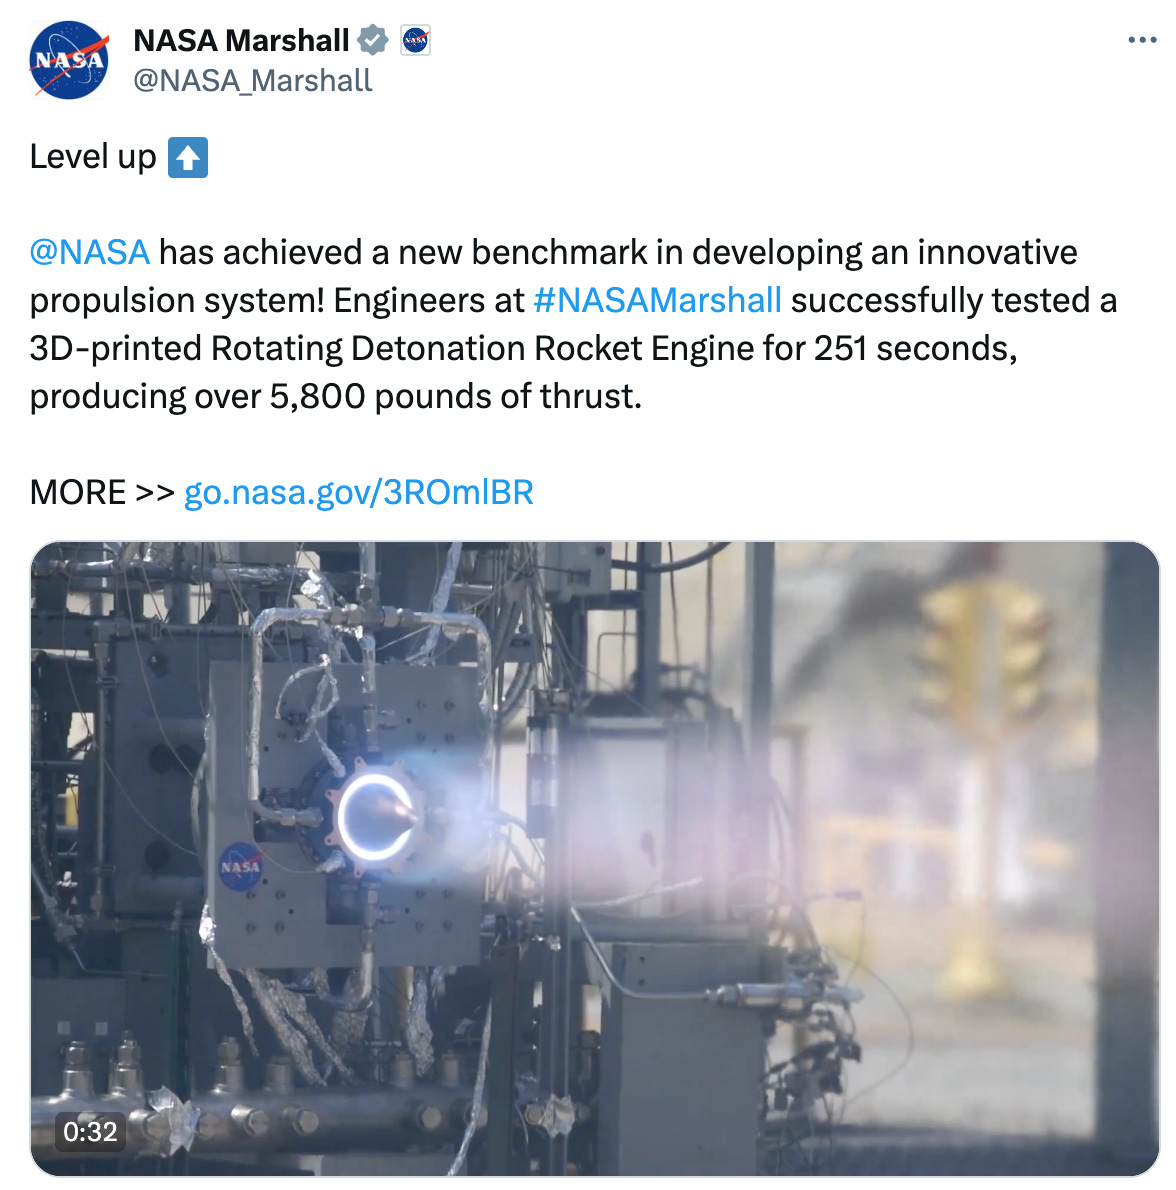  NASA Marshall  @NASA_Marshall Level up ⬆️  @NASA  has achieved a new benchmark in developing an innovative propulsion system! Engineers at #NASAMarshall successfully tested a 3D-printed Rotating Detonation Rocket Engine for 251 seconds, producing over 5,800 pounds of thrust.  MORE >> https://go.nasa.gov/3ROmlBR